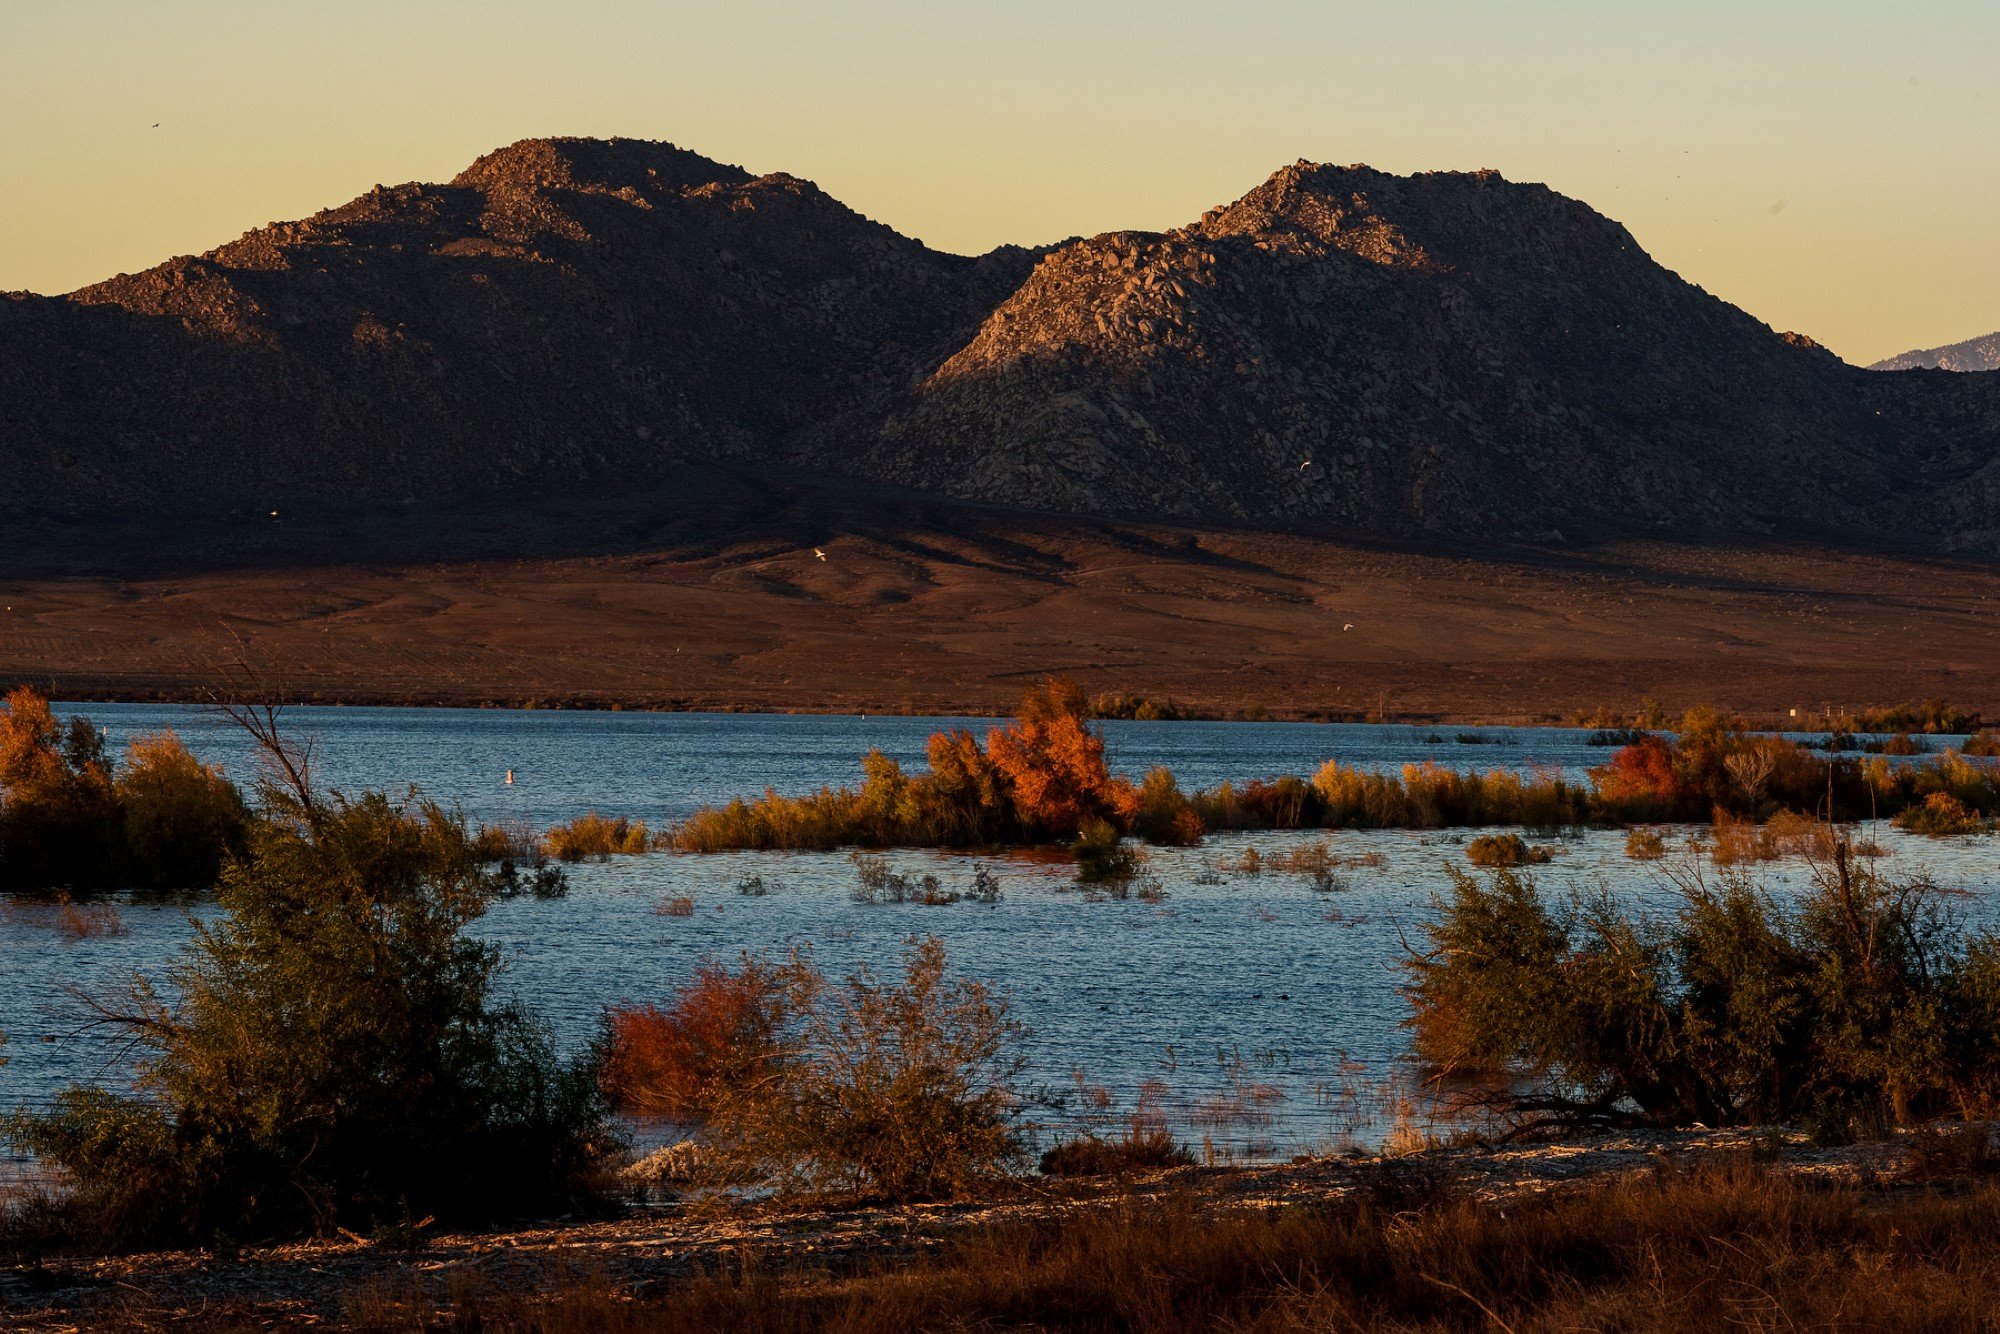 Lake Perris with hills in background